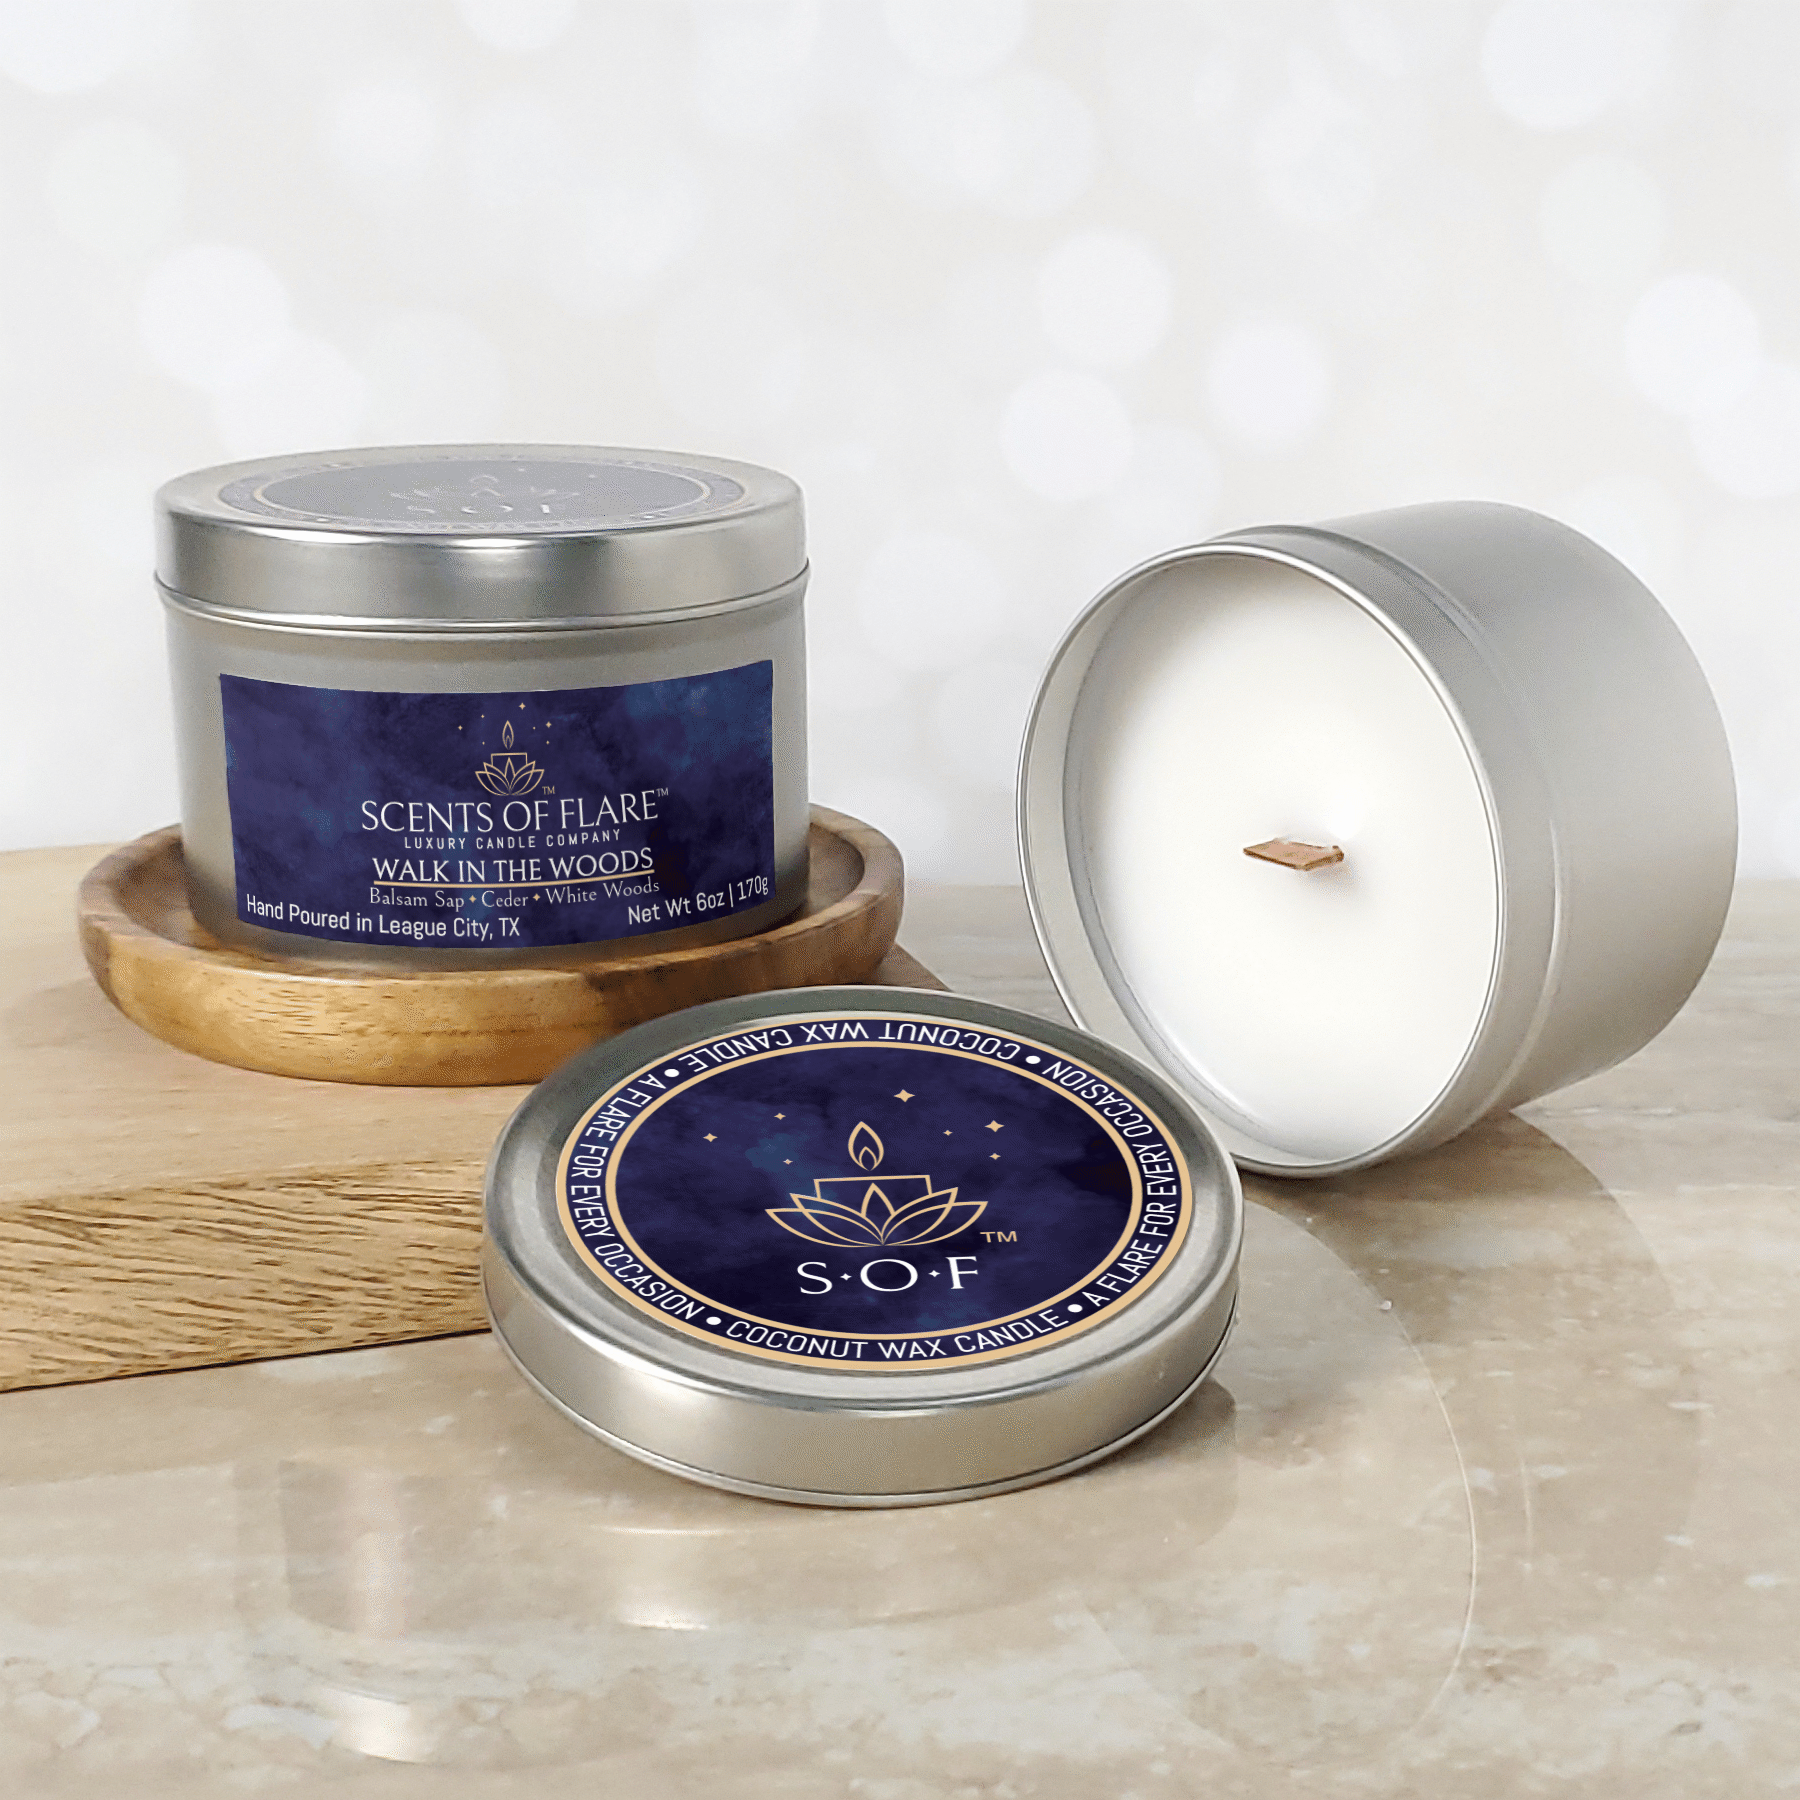 WALK IN THE WOODS 6 oz CANDLE - Scents Of Flare